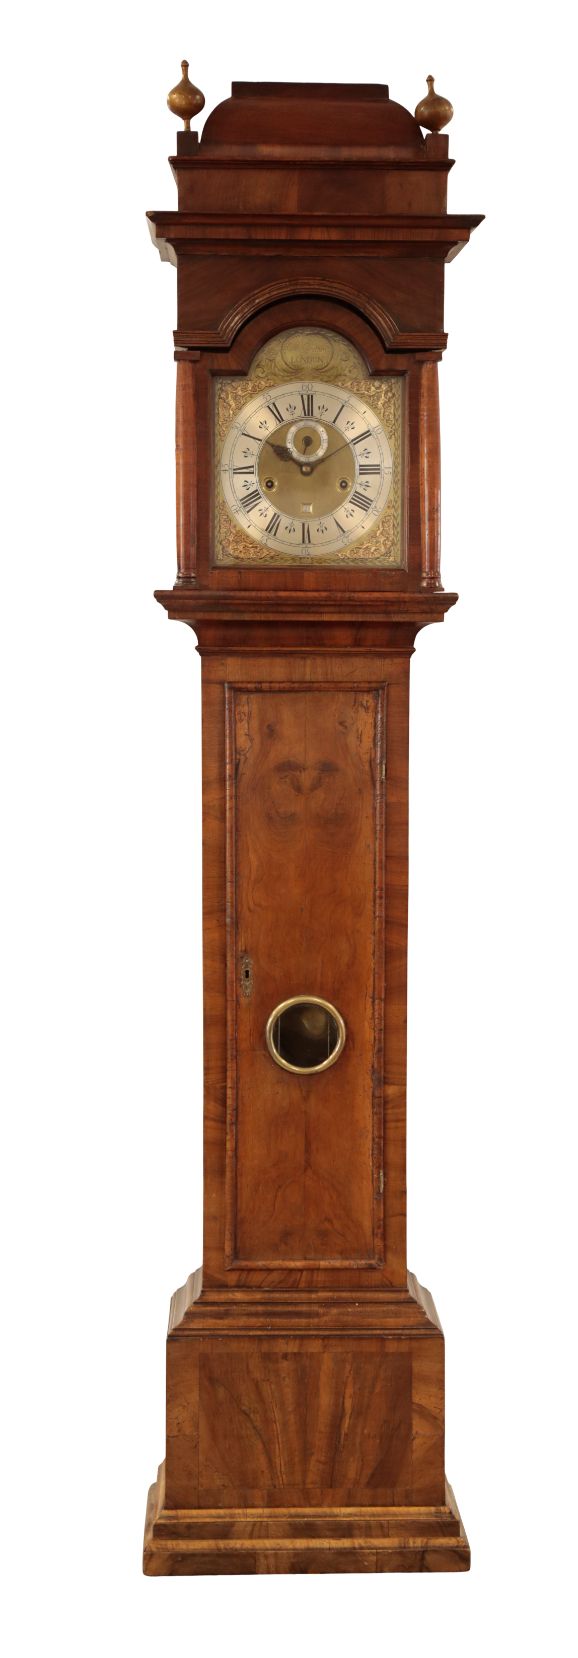 CHARLES GRETTON LONDON: A GEORGE I MONTH-GOING LONGCASE CLOCK